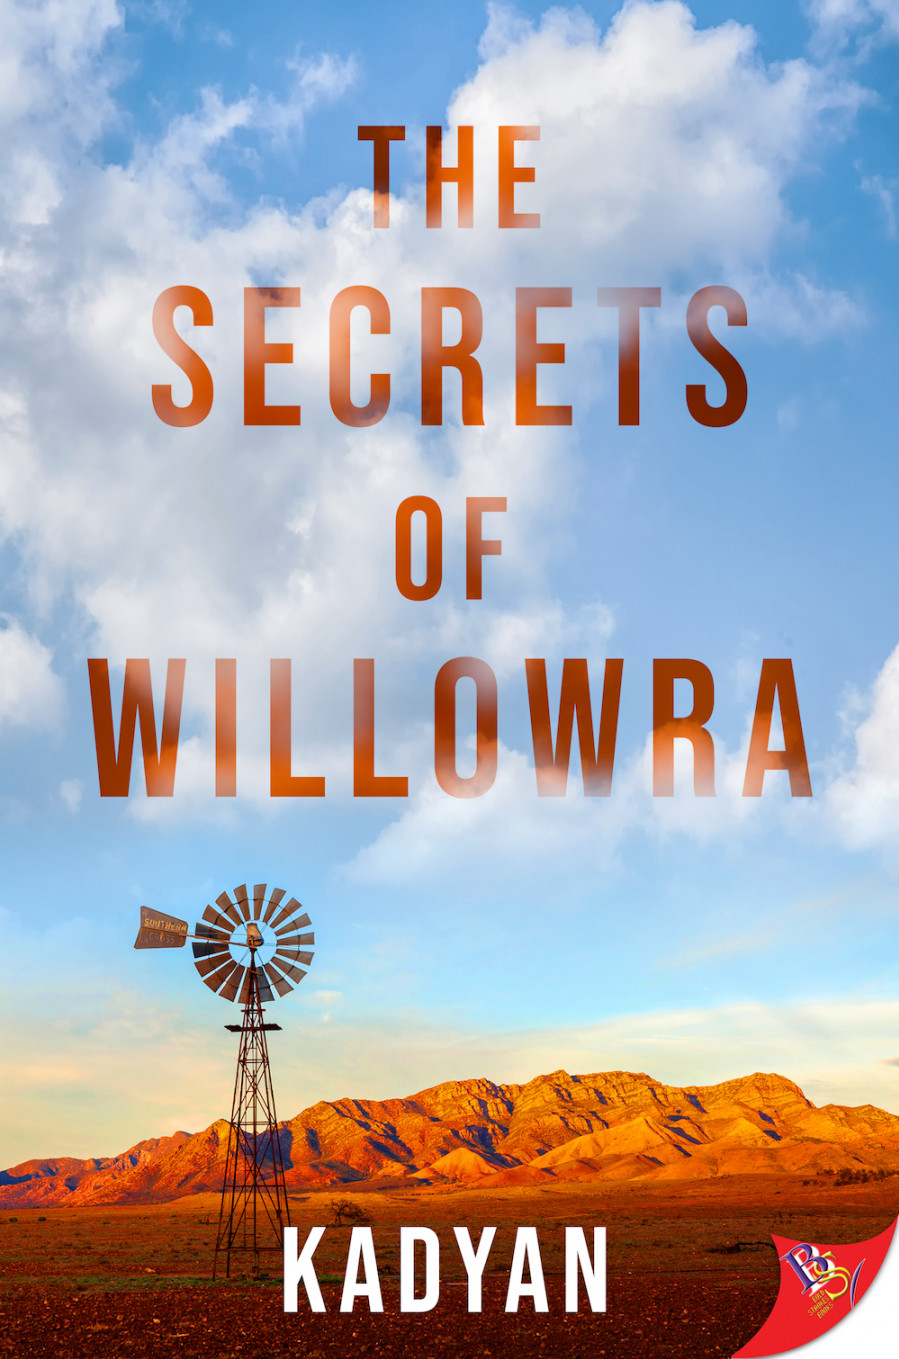 The Secrets of Willowra